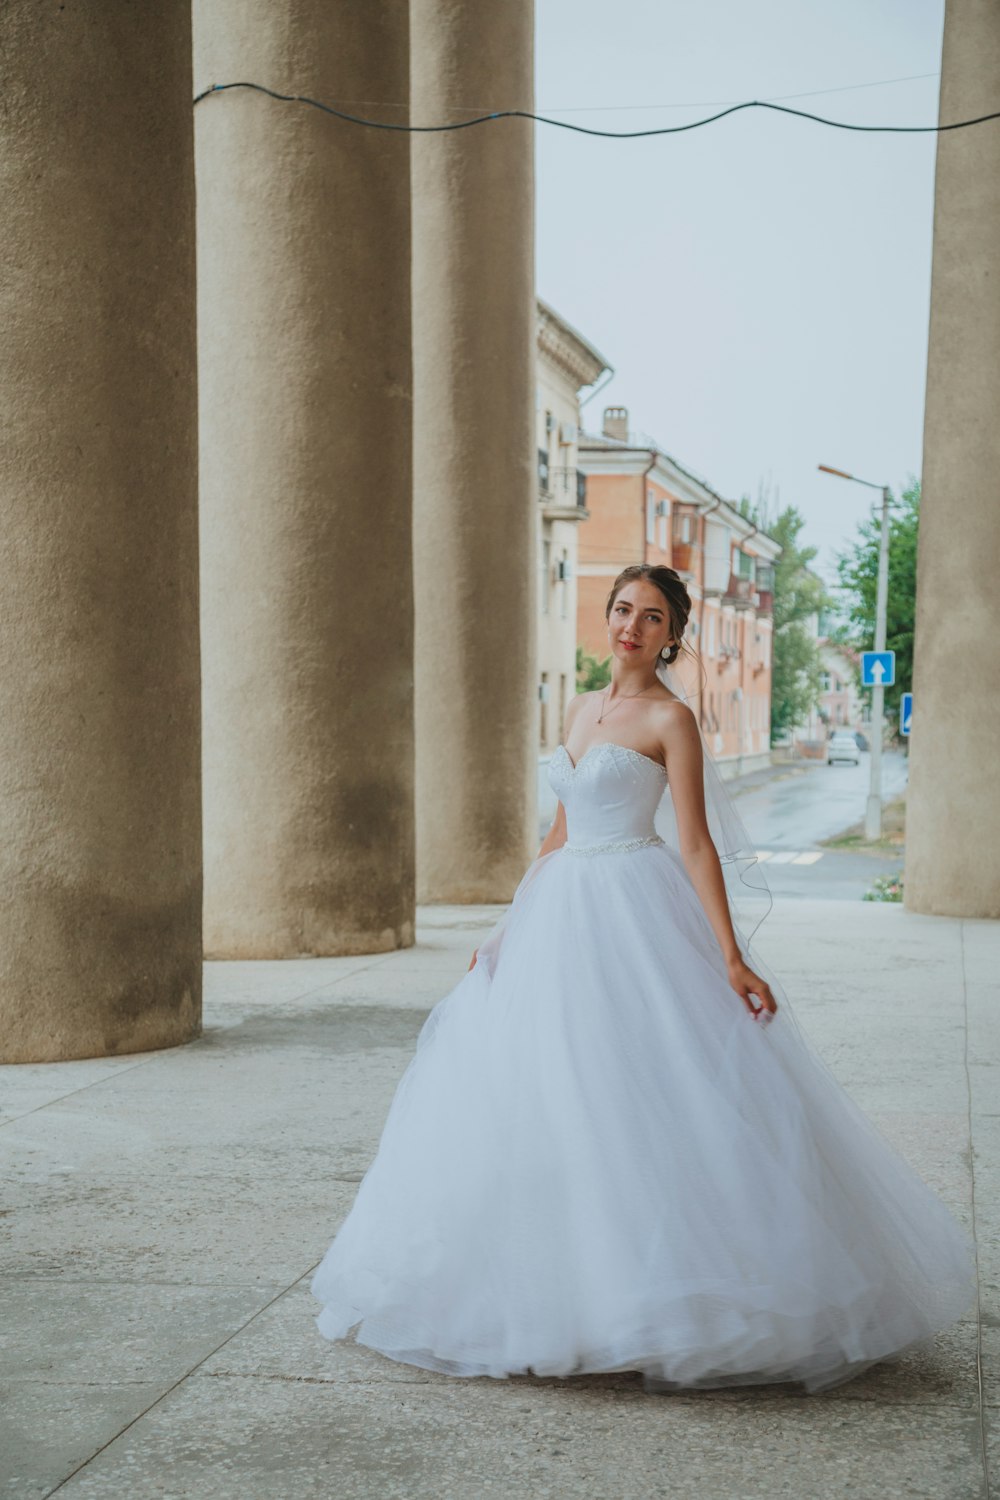 woman in white wedding dress standing near gray concrete building during daytime